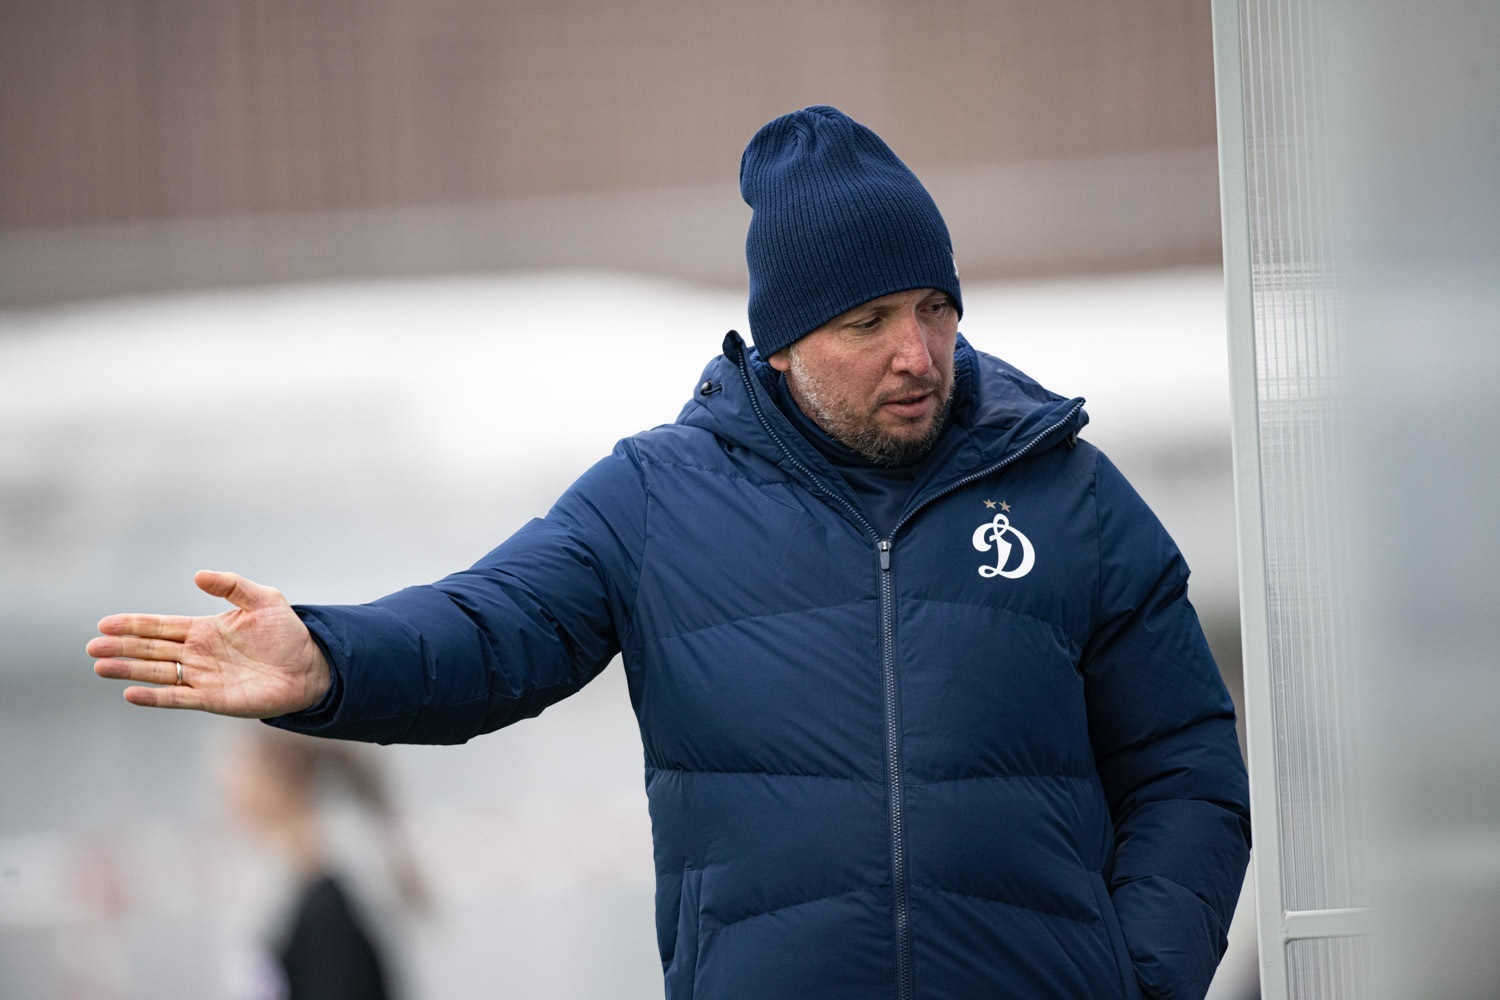 Dynamo Moscow WFC News | Mikhail Kobyakov: "We are in good shape for the start of the Youth League." Official club website Dynamo.